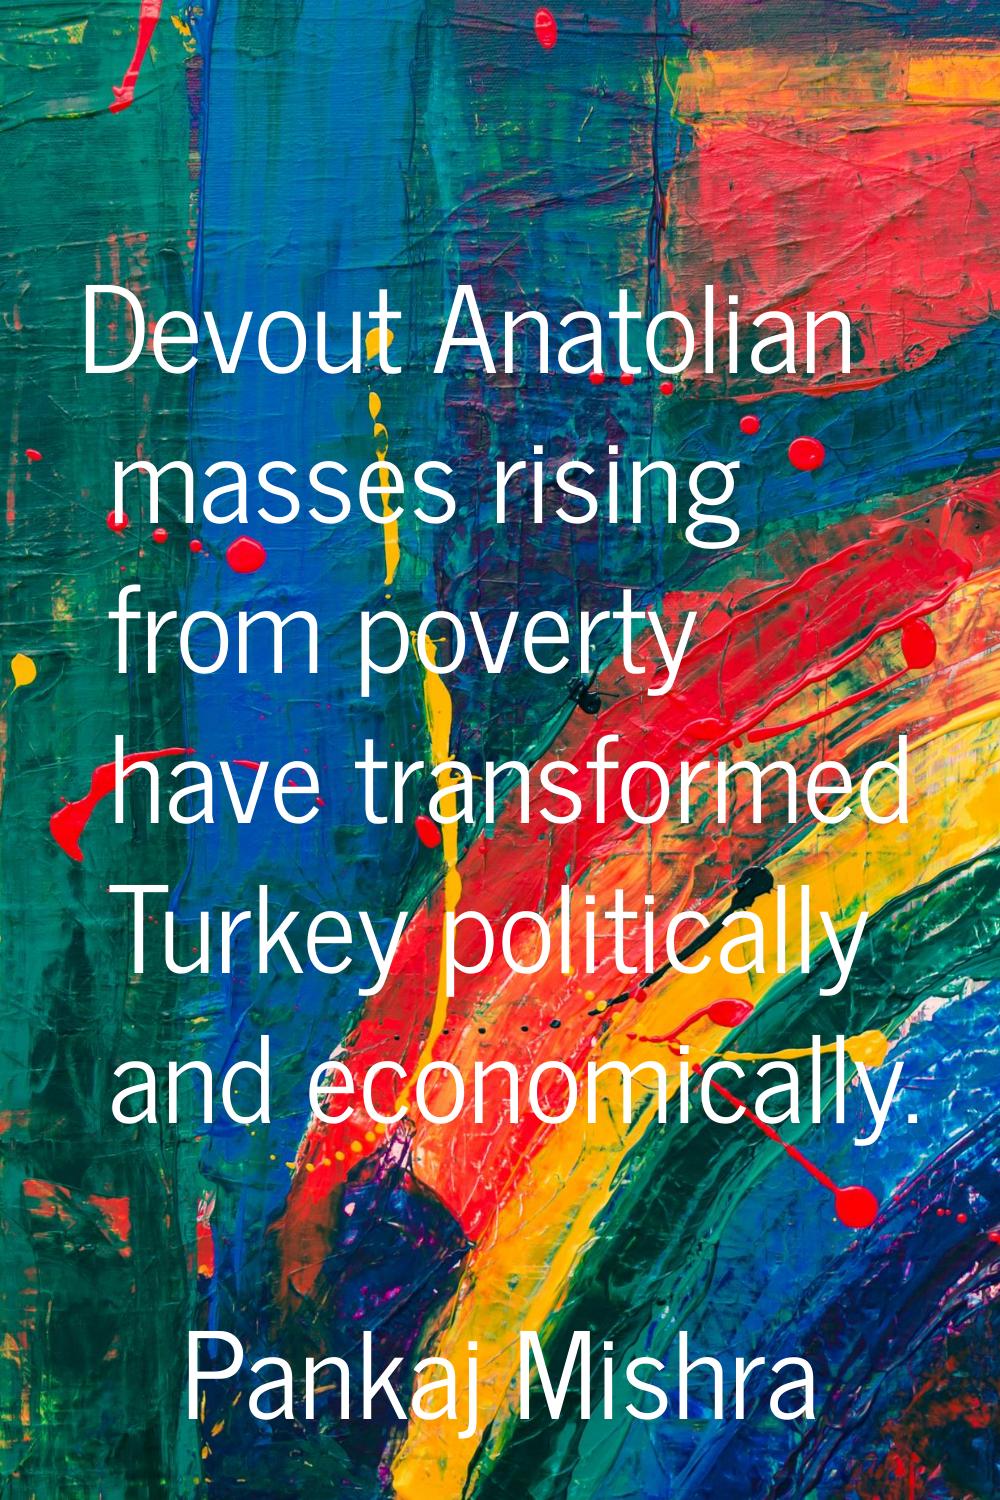 Devout Anatolian masses rising from poverty have transformed Turkey politically and economically.